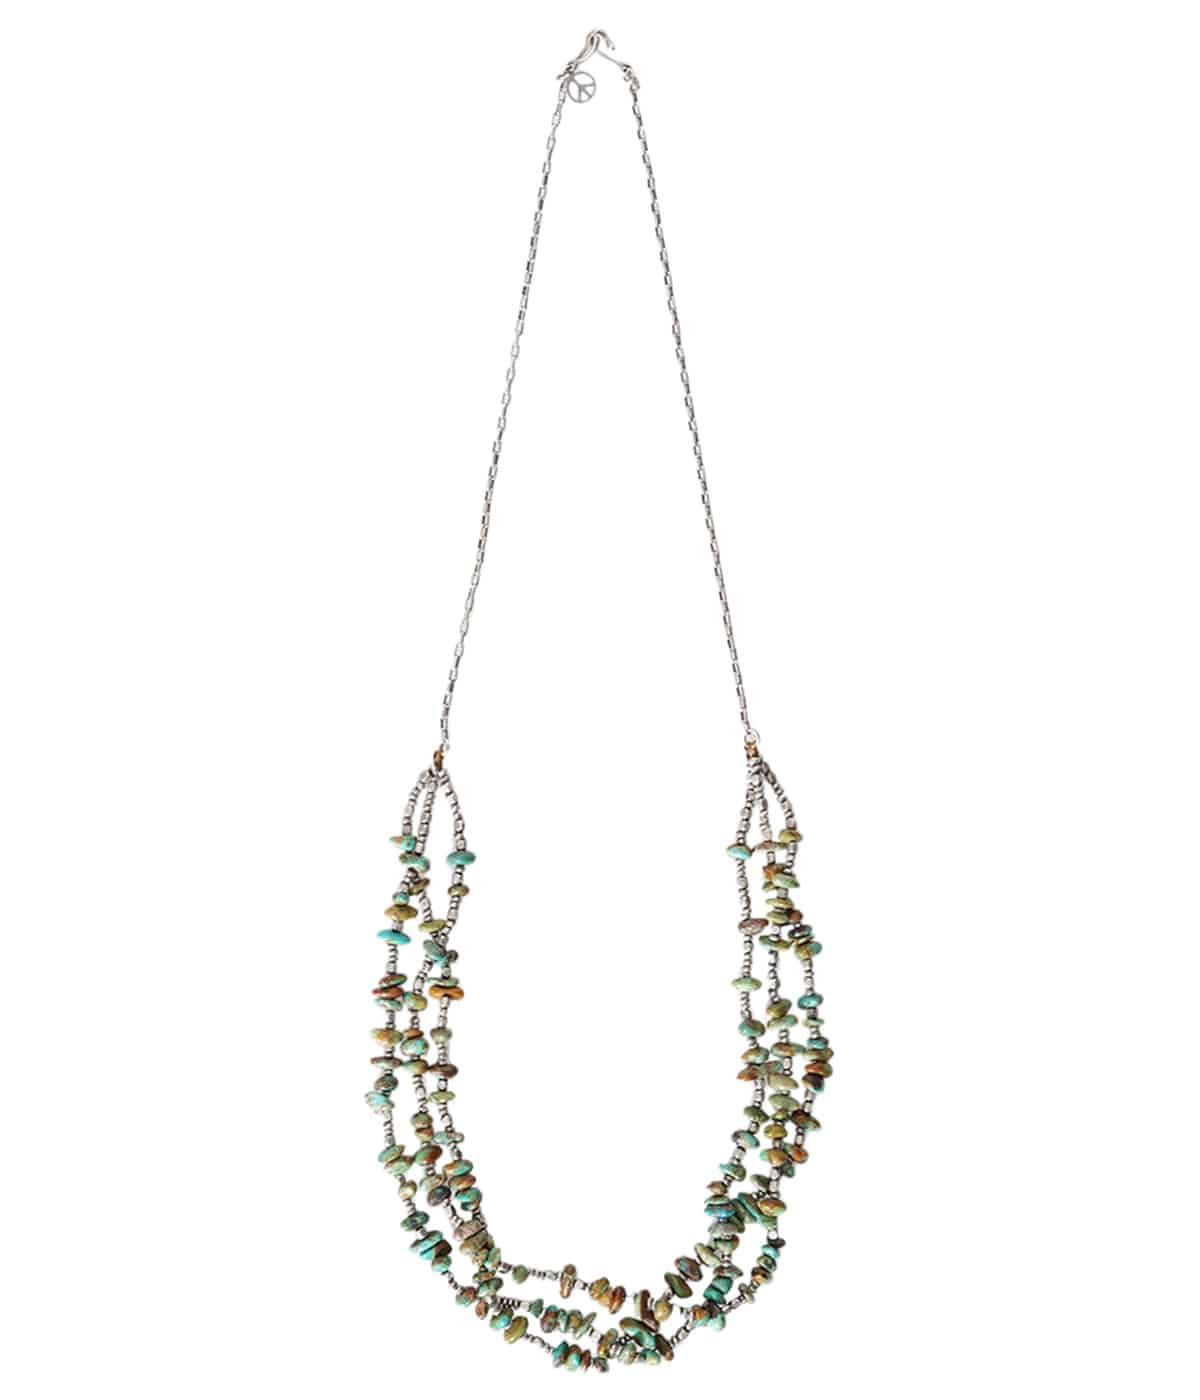 Turquoise Necklace | PORT BY ARK(ポートバイアーク) / アクセサリー ネックレス (メンズ レディース)の通販 -  ARKnets(アークネッツ) 公式通販 【正規取扱店】